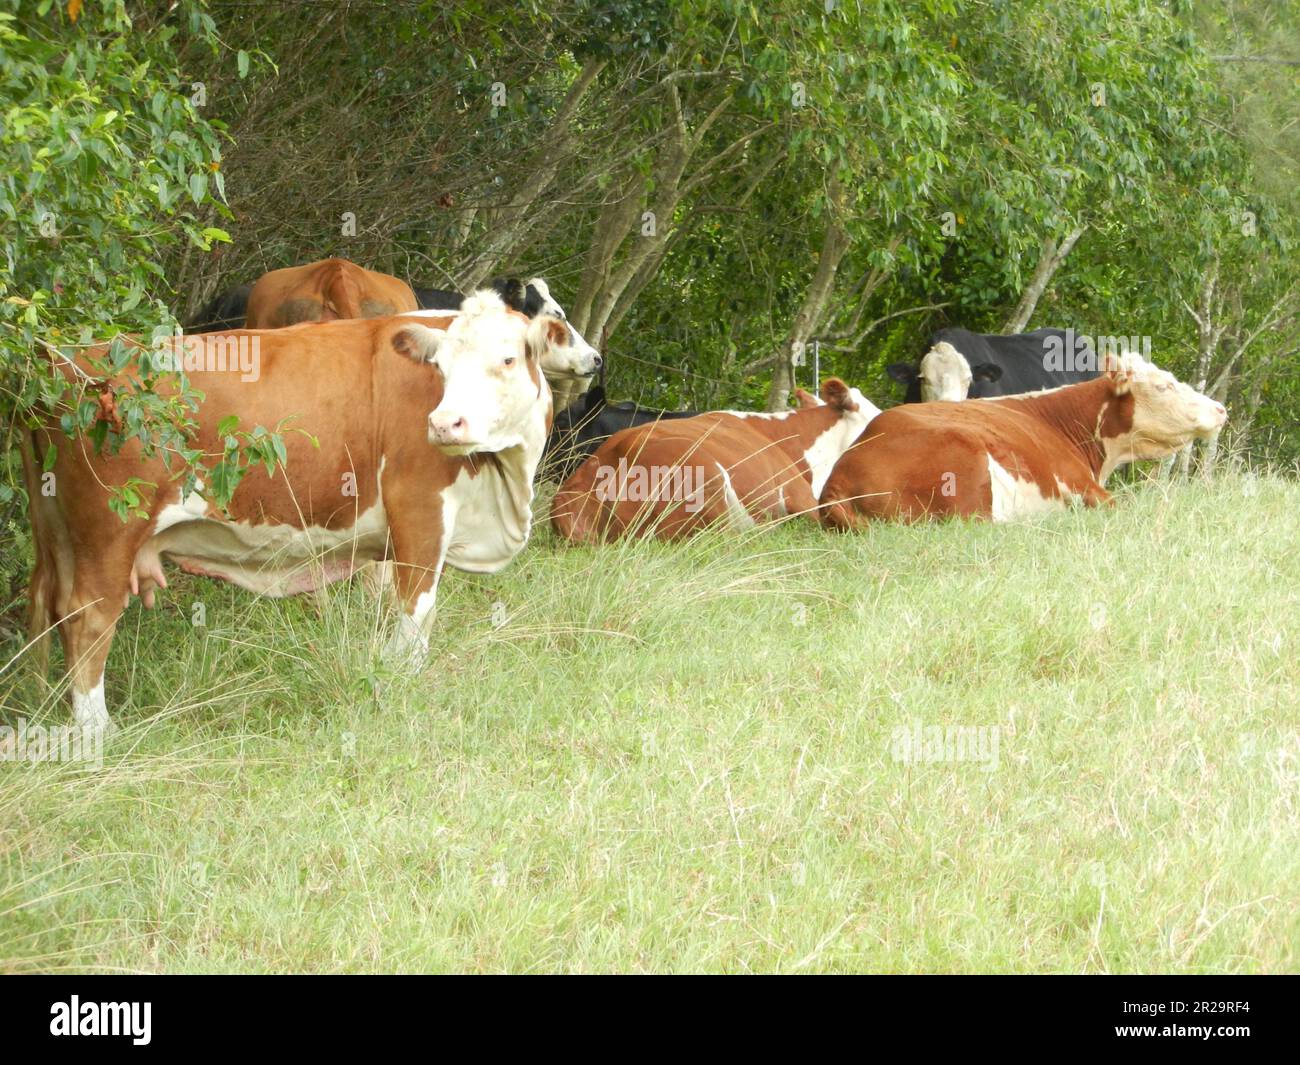 Six cows sitting and standing in a field of grass up against bushes. Stock Photo